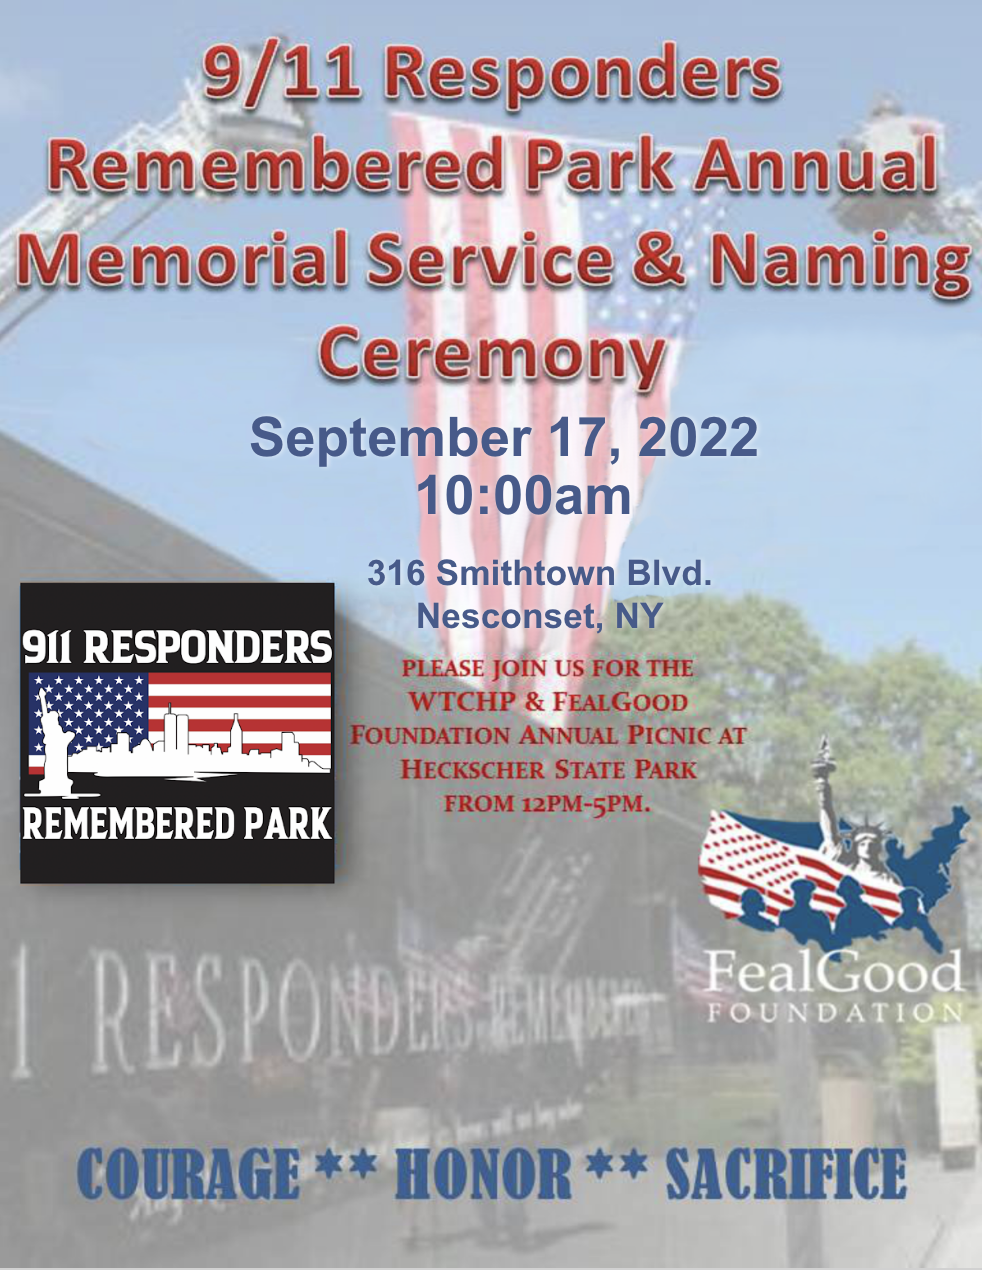 9/11 Responders Remembered Park Annual Memorial Service and Naming Ceremony